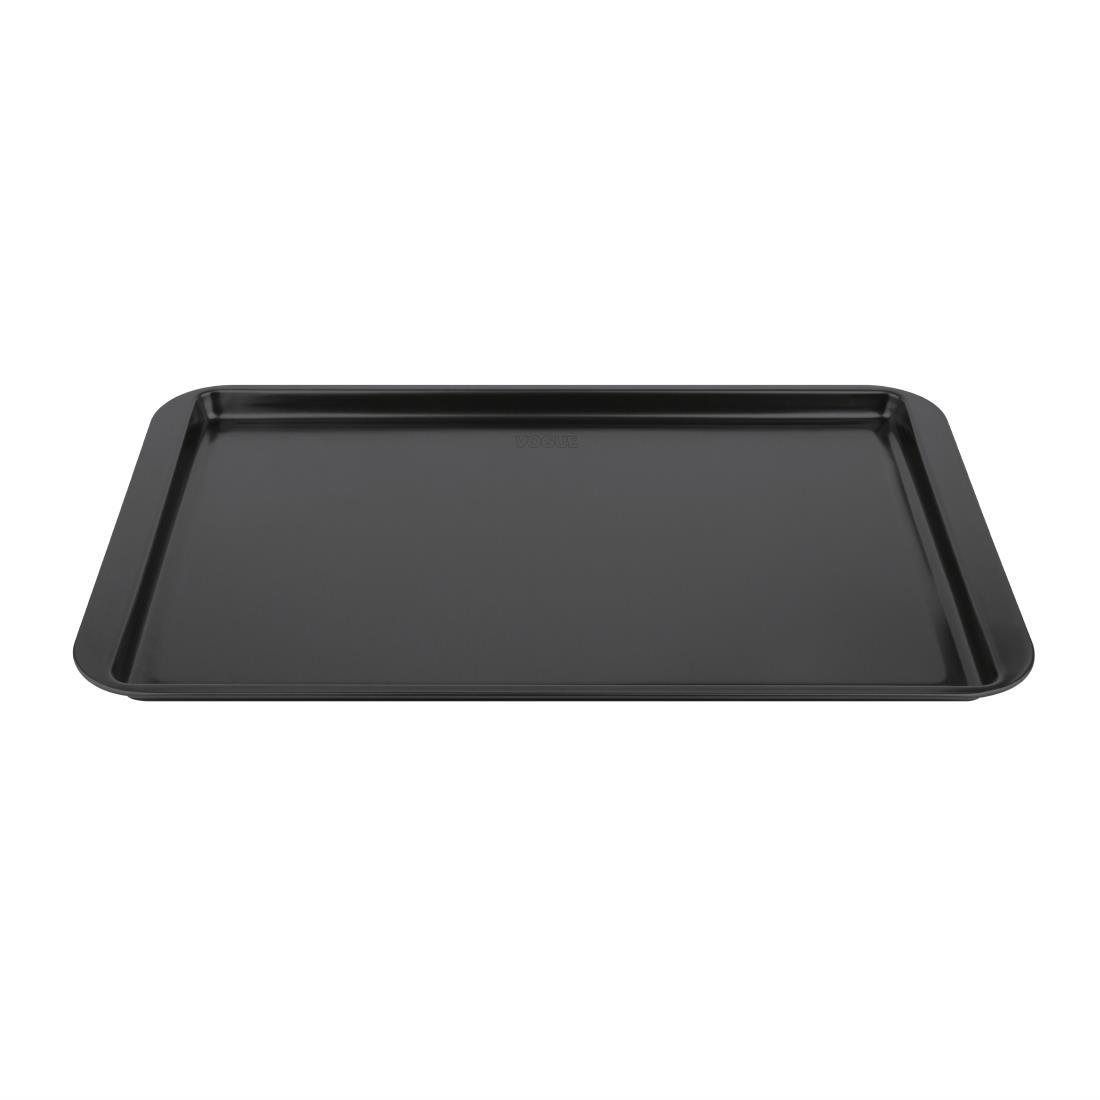 Vogue Non-Stick Carbon Steel Baking Tray 482 x 305mm - GD016  - 2